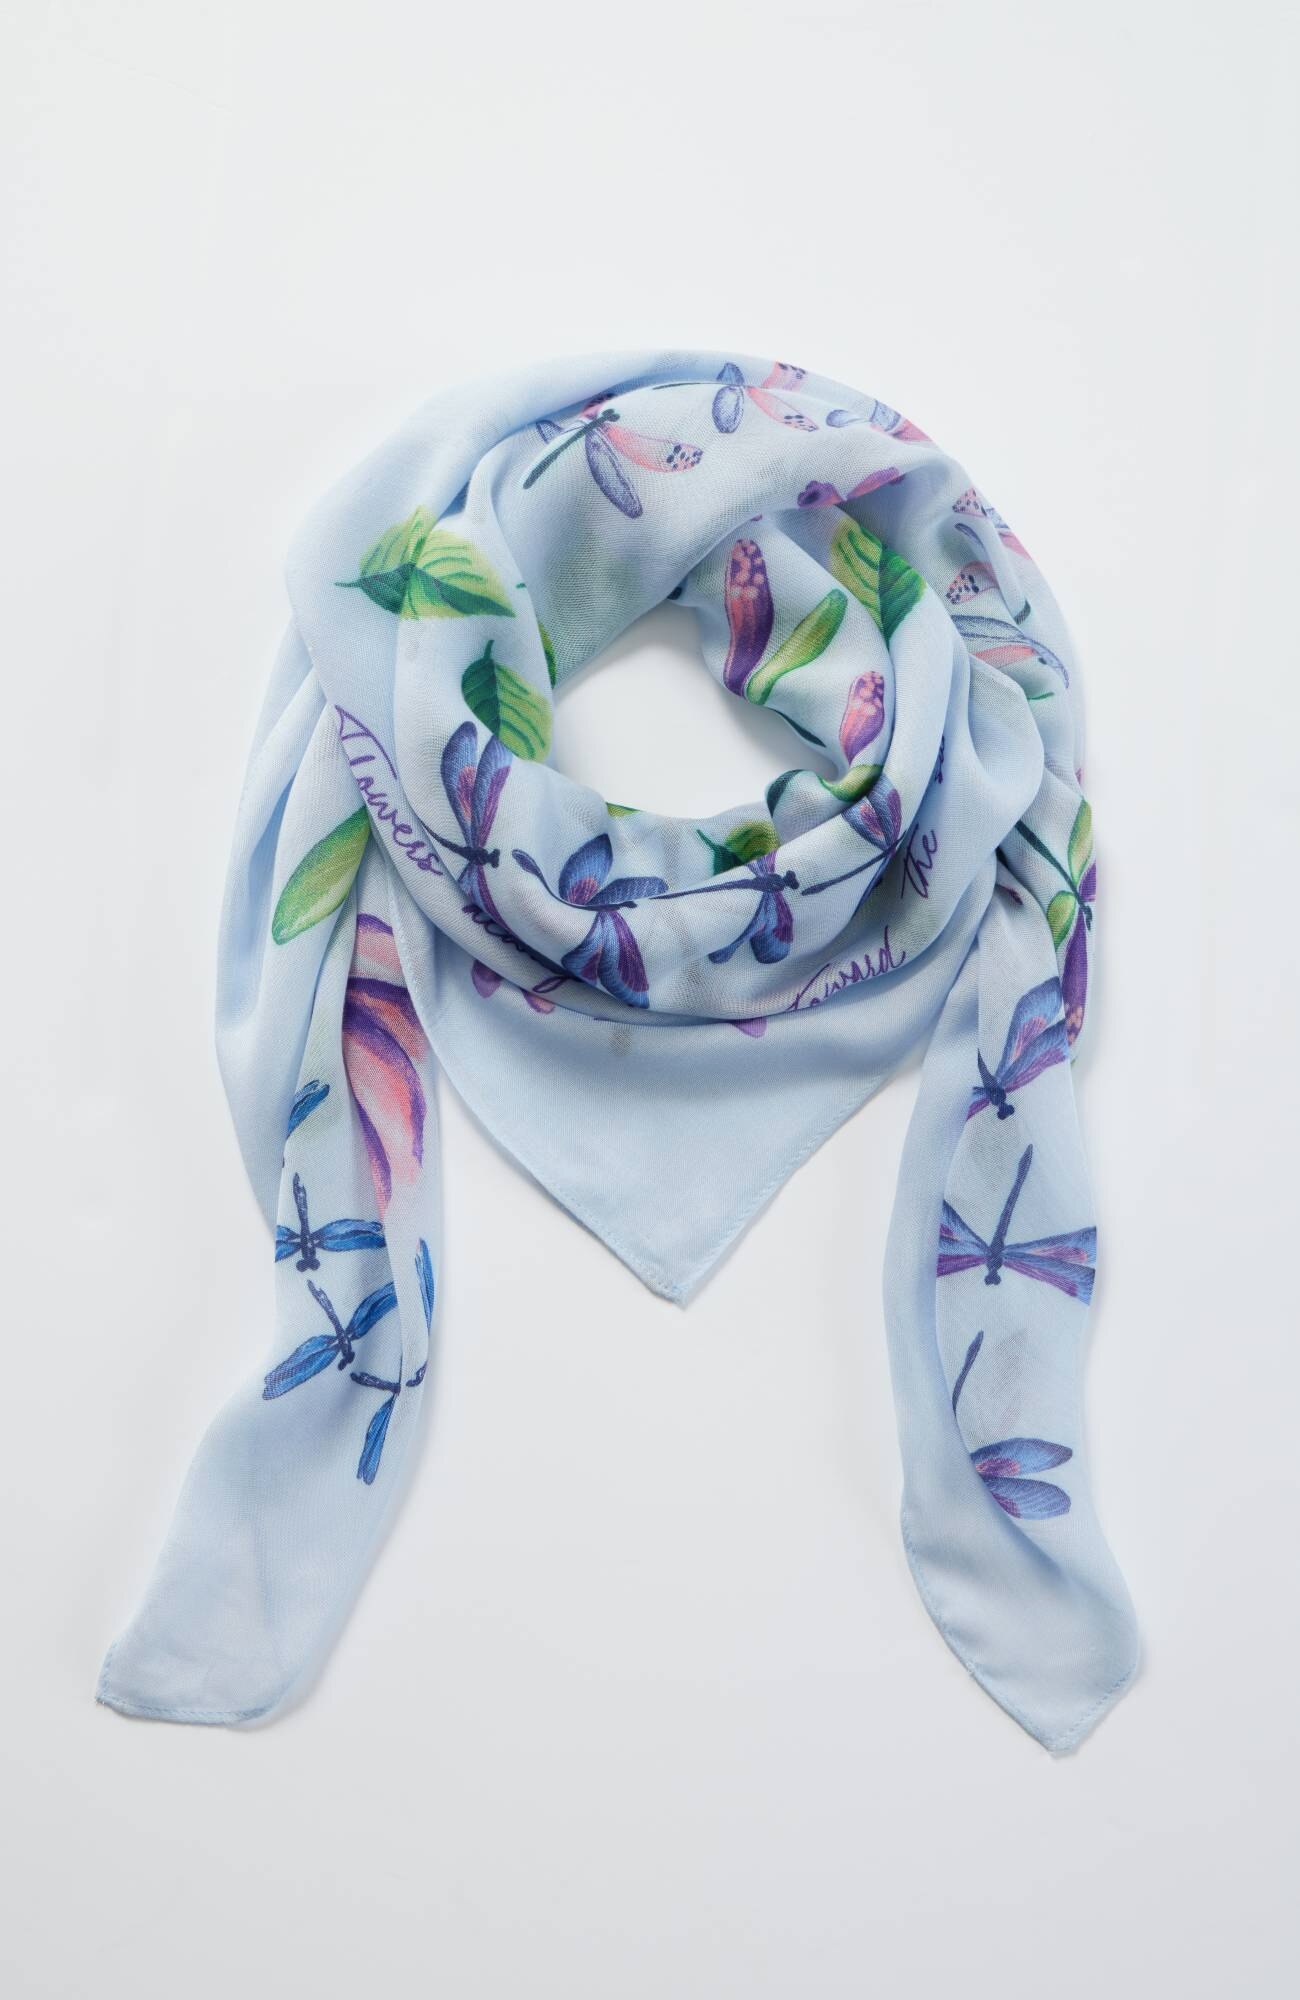 Compassion Fund Dragonfly Square Scarf